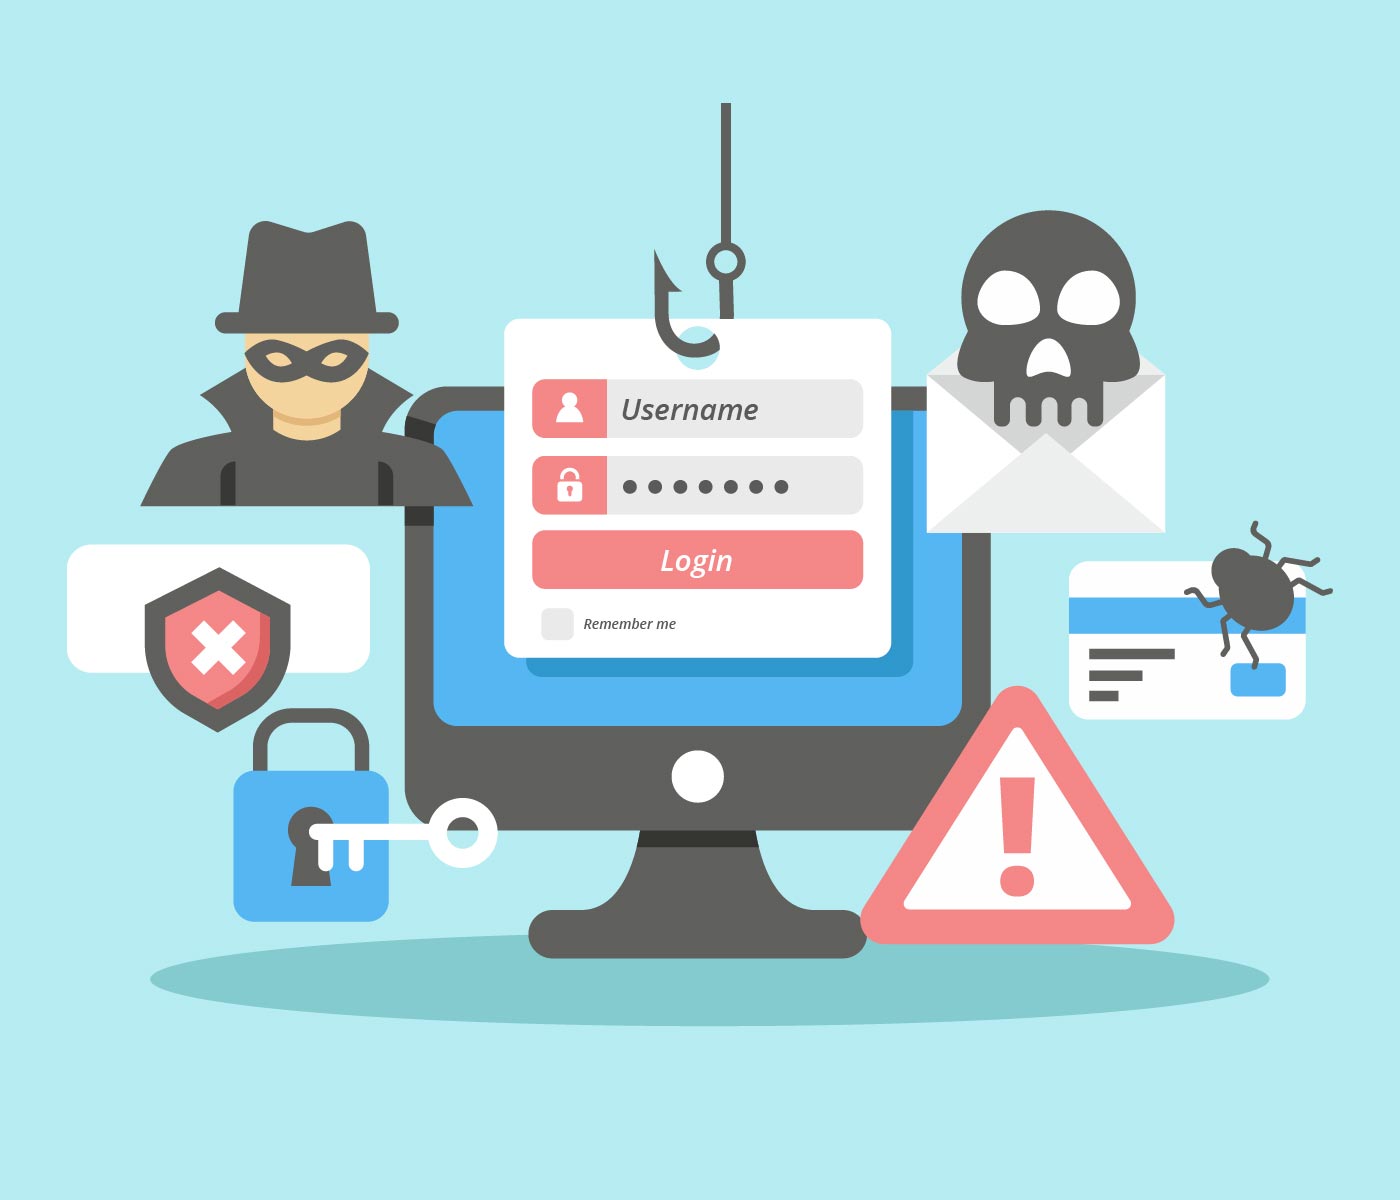 How to recognize and protect yourself against phishing scams